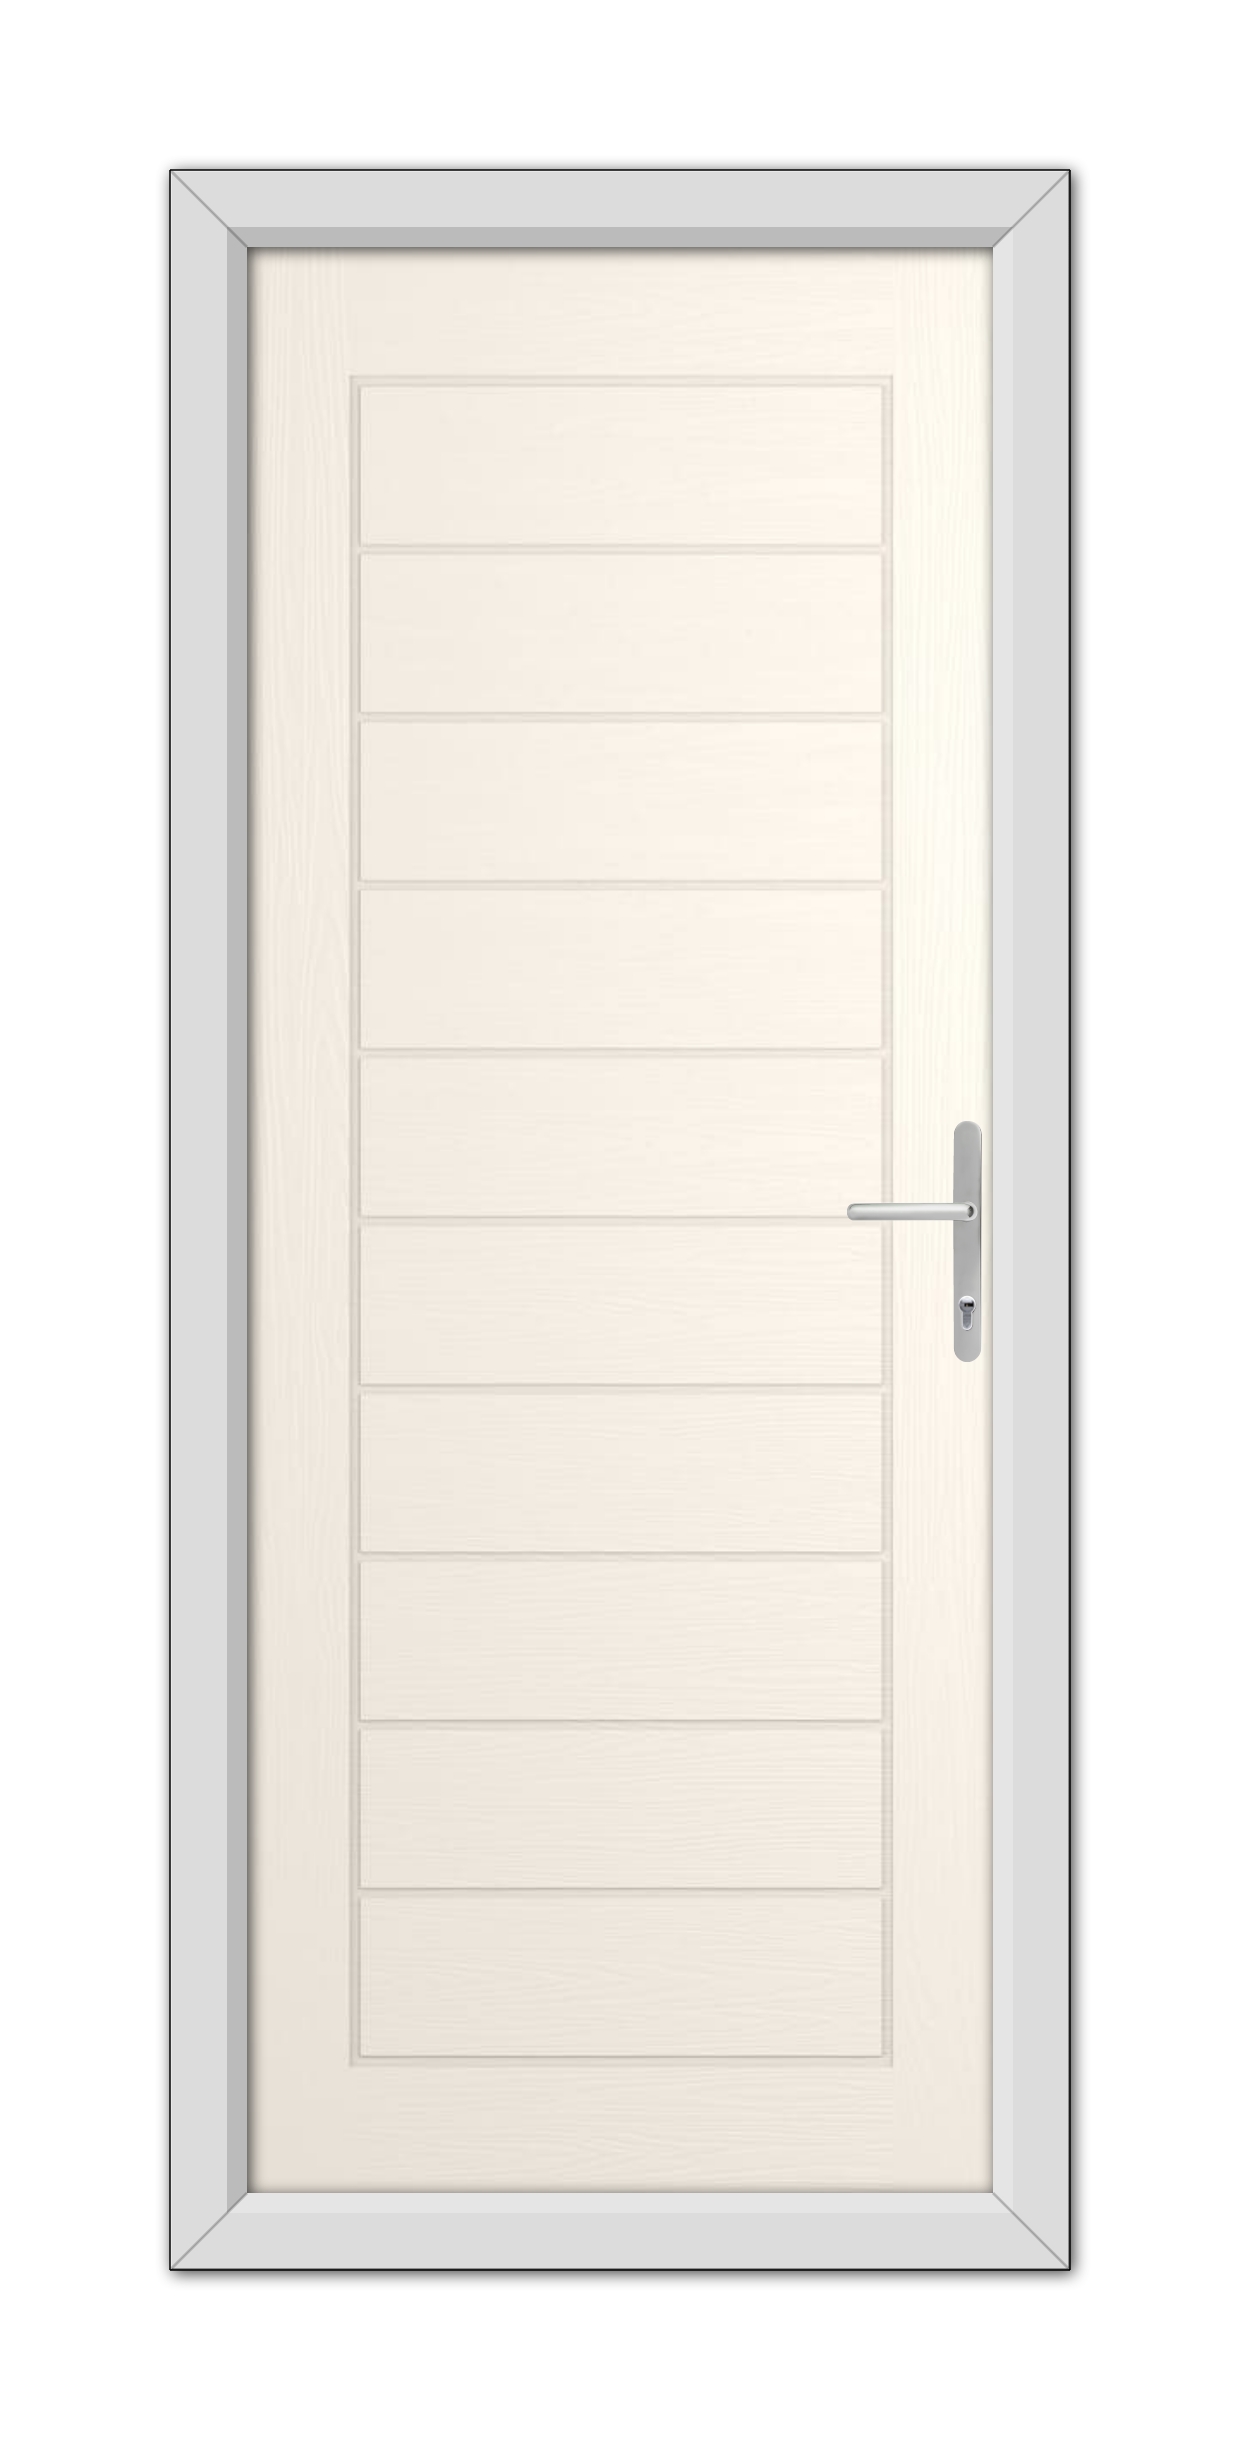 A modern White Foil Cambridge Composite Door with horizontal panels and a metallic handle, set within a light gray frame.